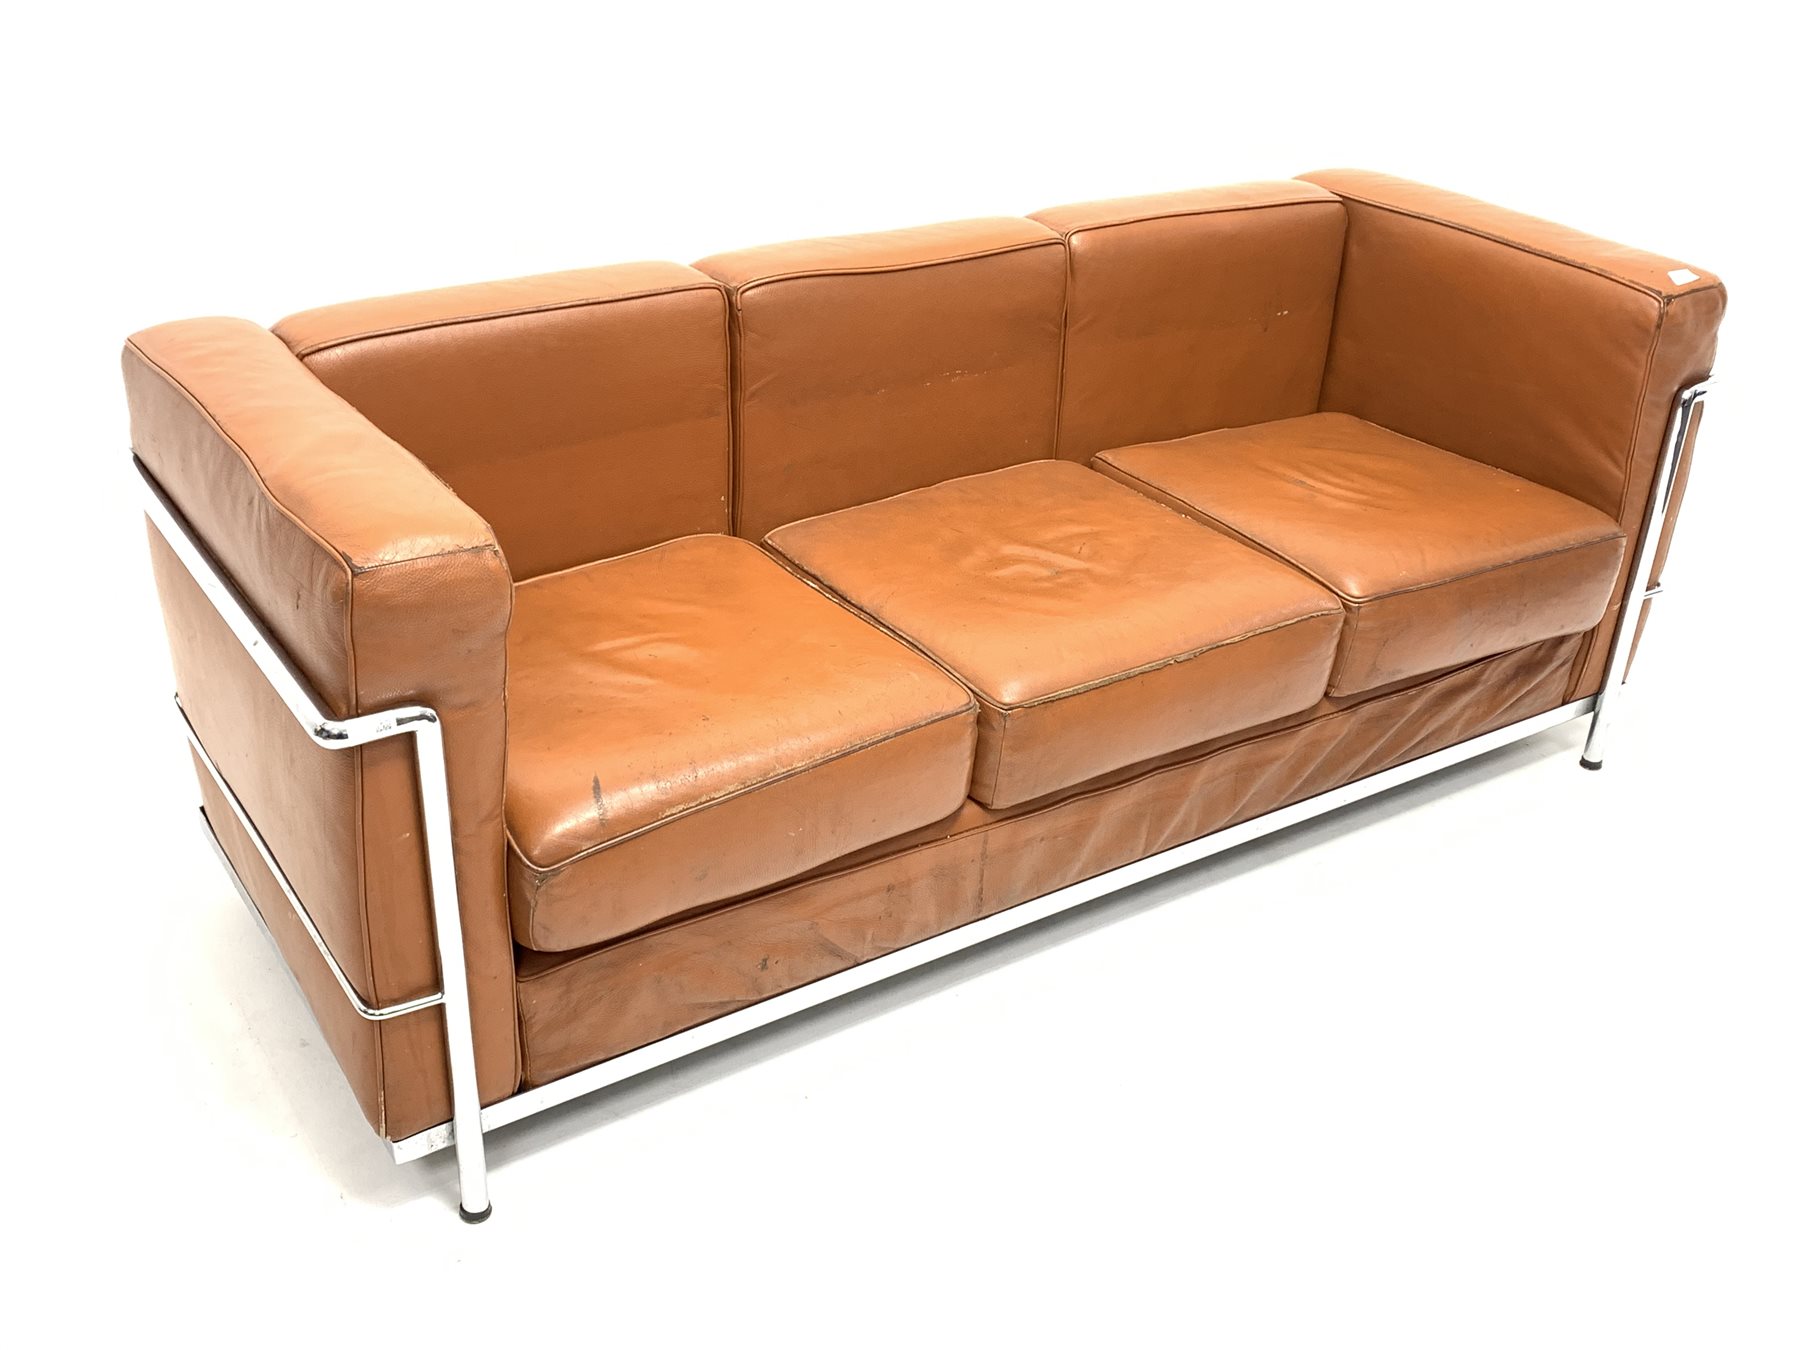 After Le Corbusier - Mid 20th century three seat sofa with chrome frame and brown leather upholstere - Image 3 of 4